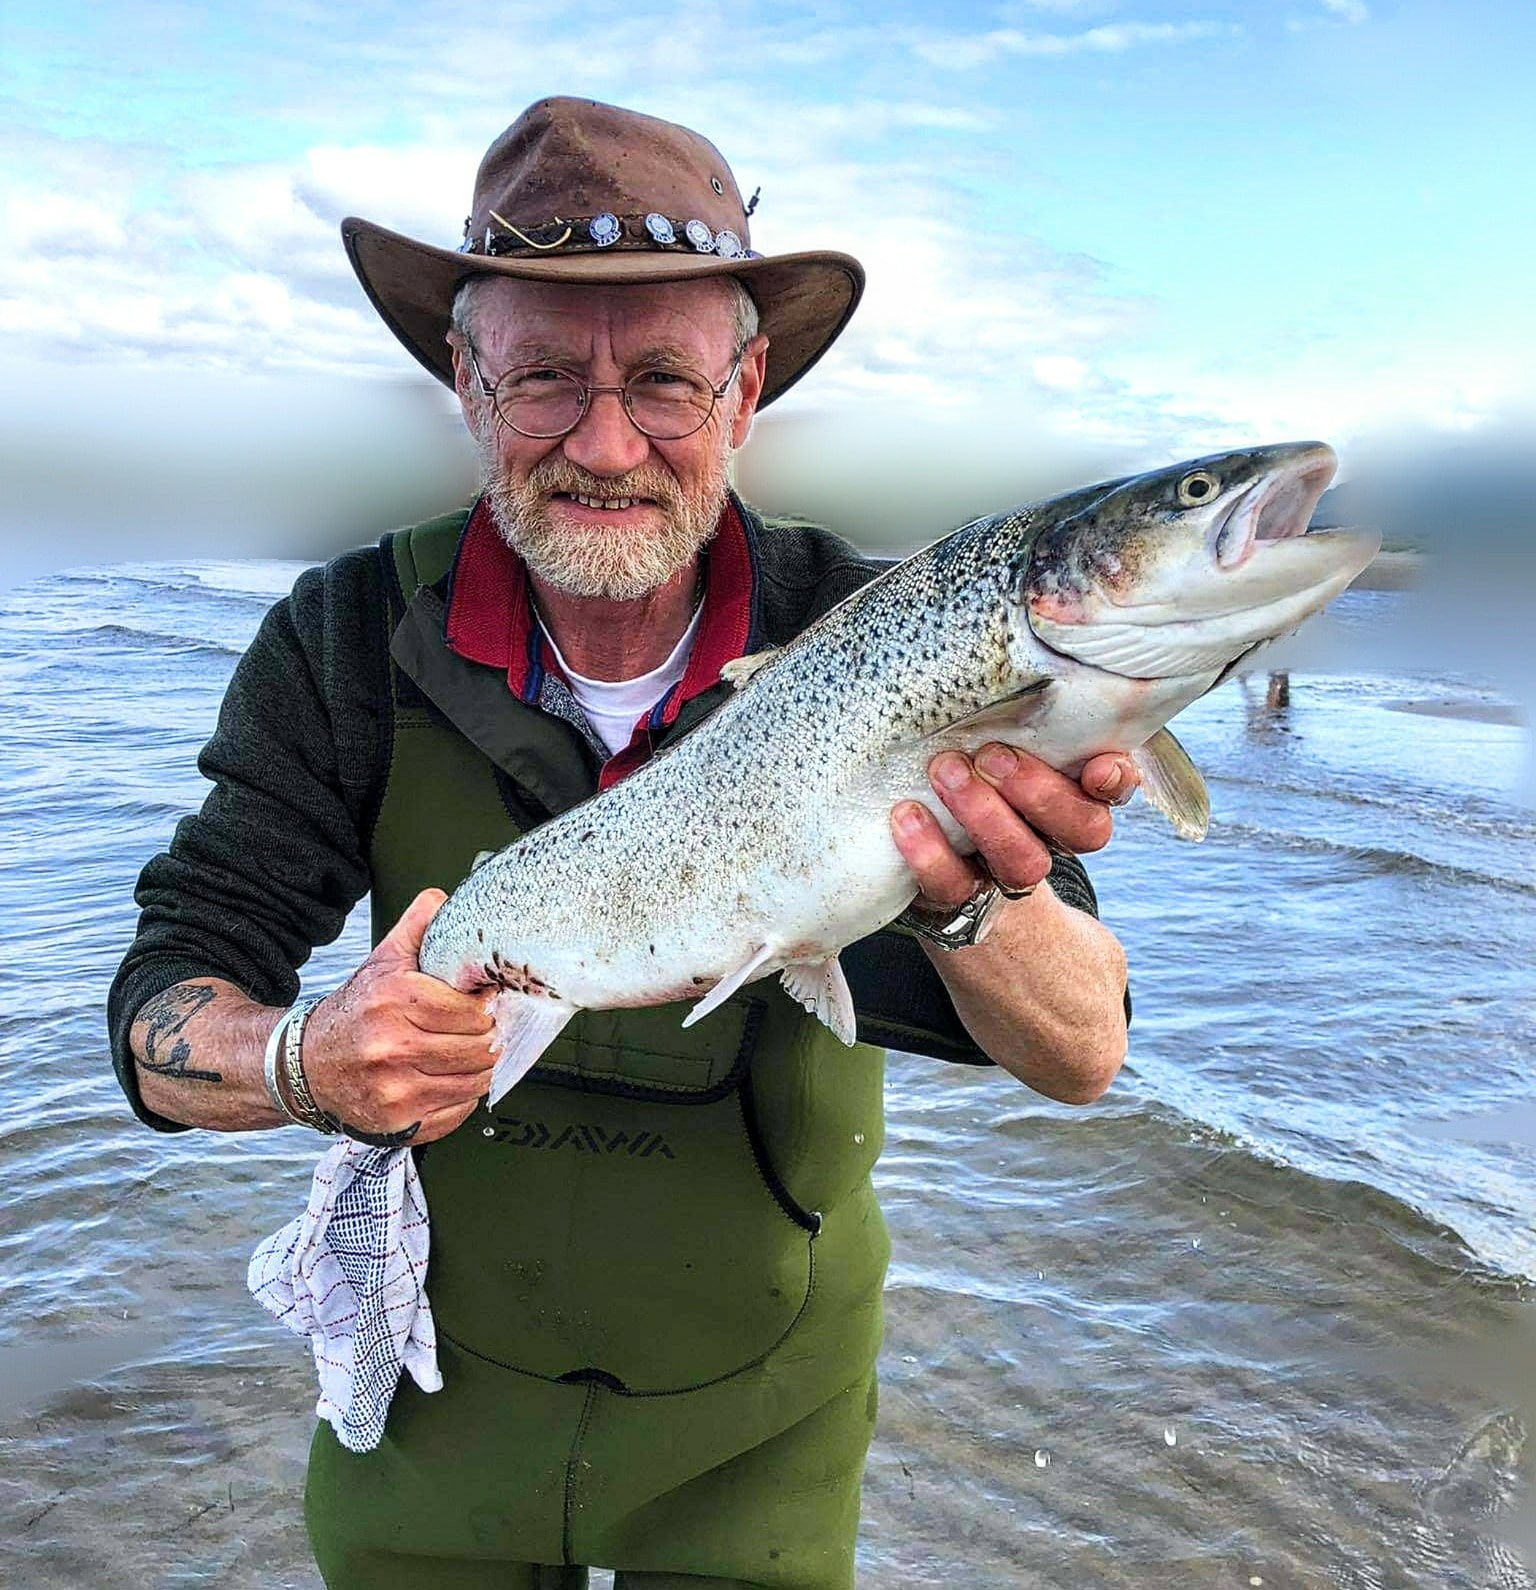 Sea trout from the Irish coast  Fishing in Ireland - Catch the